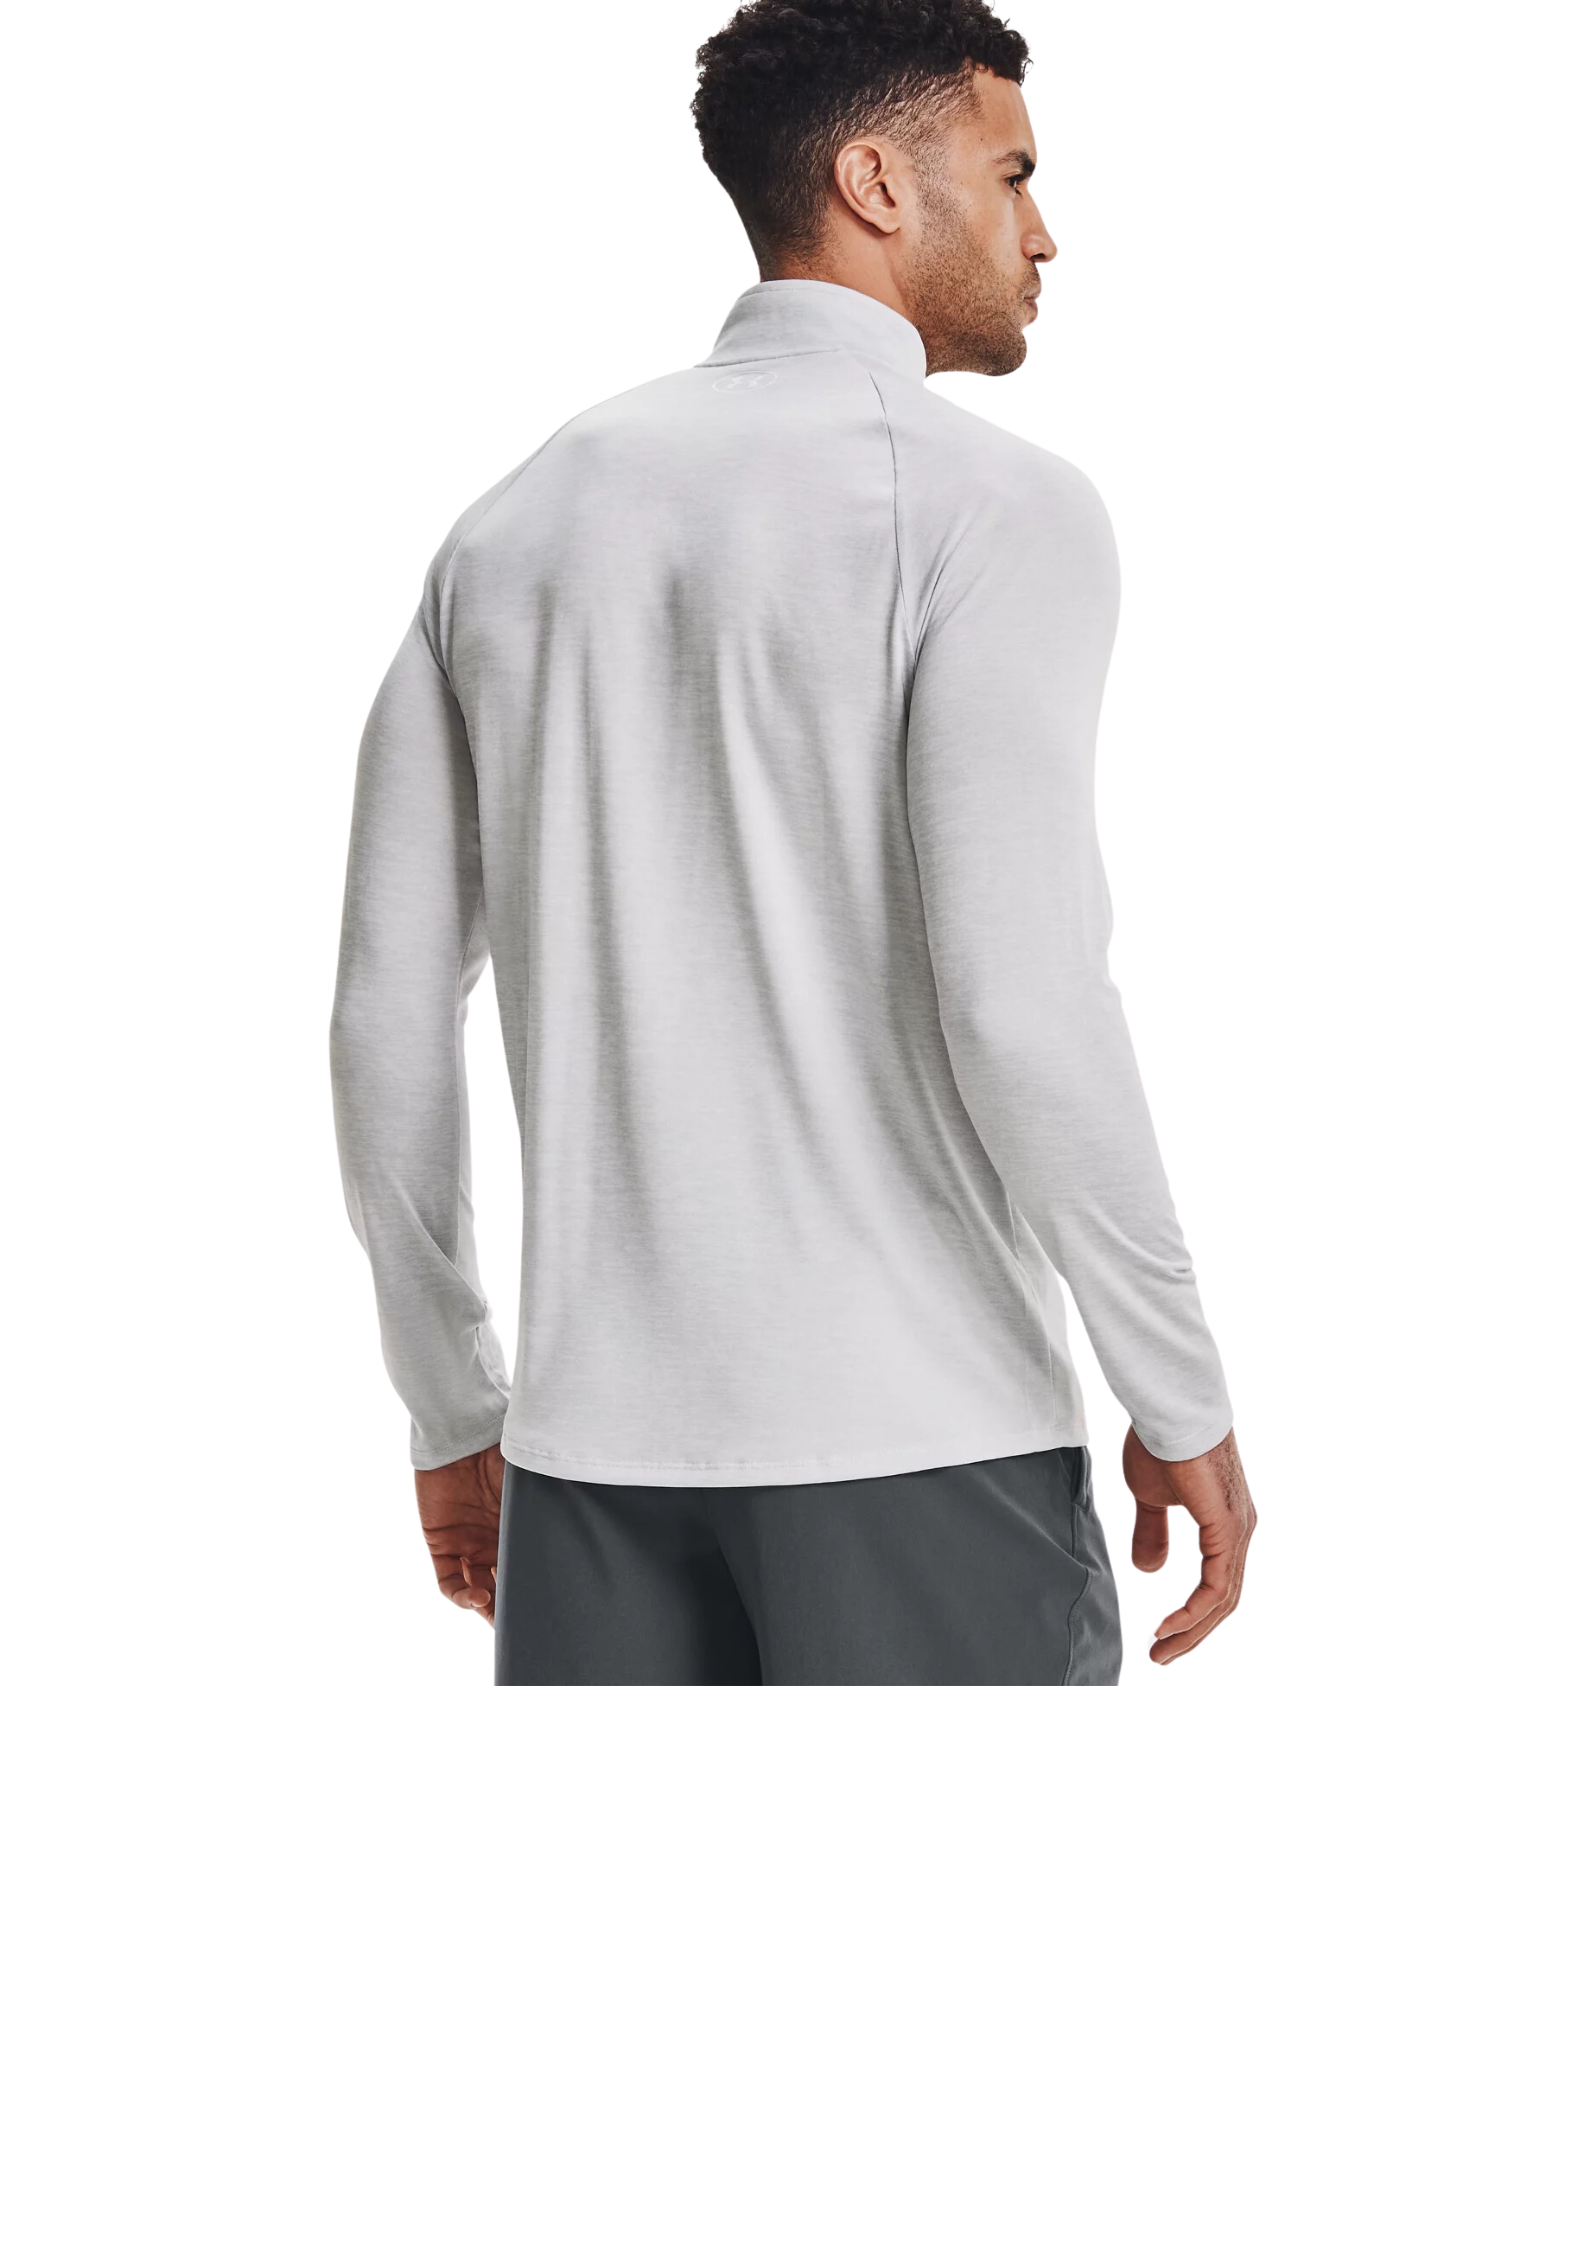 Under Armour  | 1328495-014 | tech 1/2 Zip Long Sleeve | Halo Gray / White